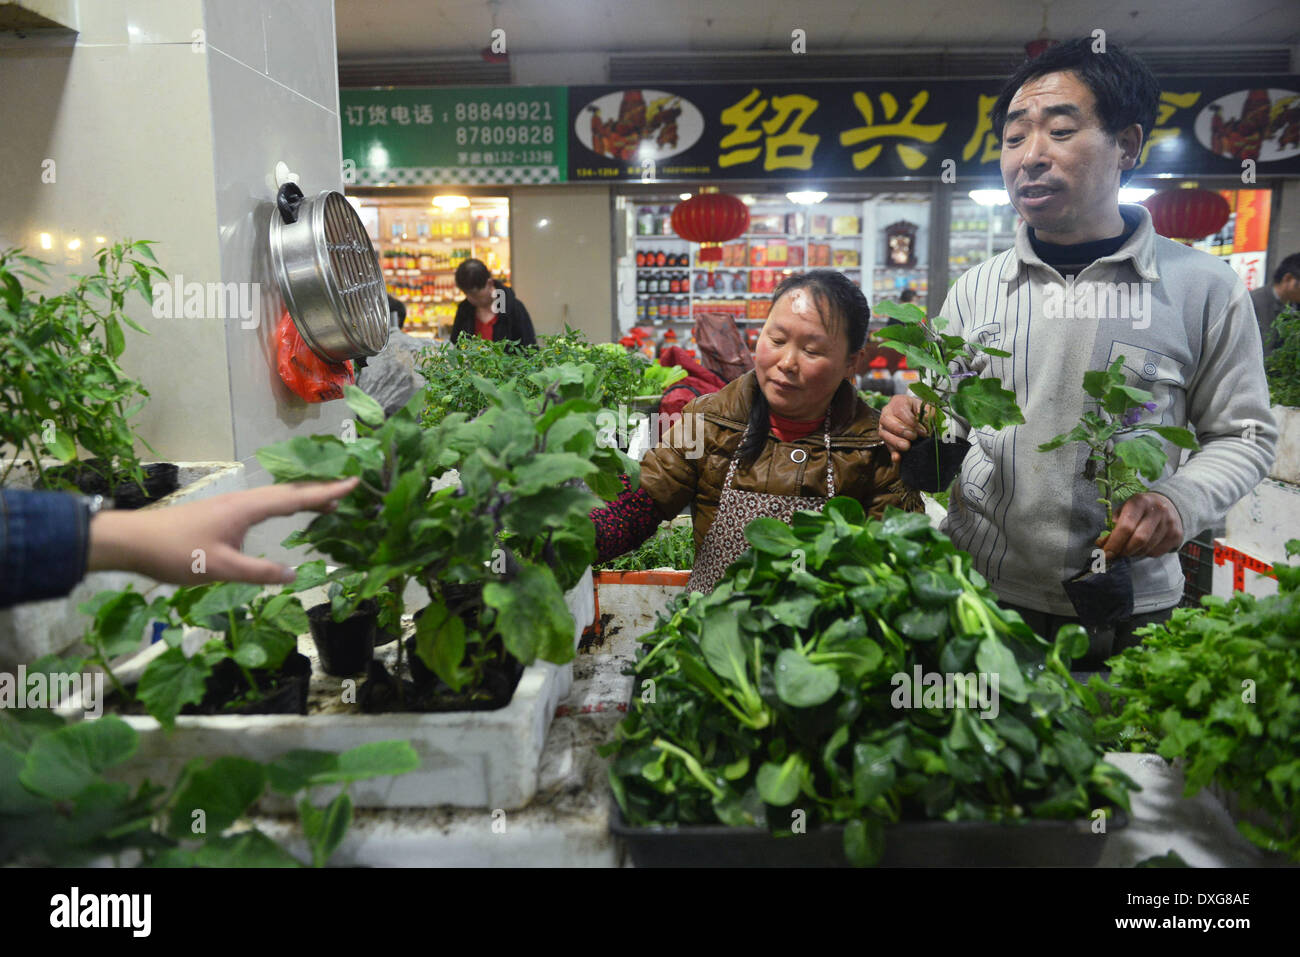 (140326) -- HANGZHOU, March 26, 2014 (Xinhua) -- Chen Yilin (R) sells vegetable seedlings in a market in Hangzhou, capital of east China's Zhejiang Province, March 25, 2014. Chen Yilin's vegetable seedlings were very popular with consumers and he sold nearly 1,000 ones every day recently.(Xinhua/Long Wei) (zwy) Stock Photo